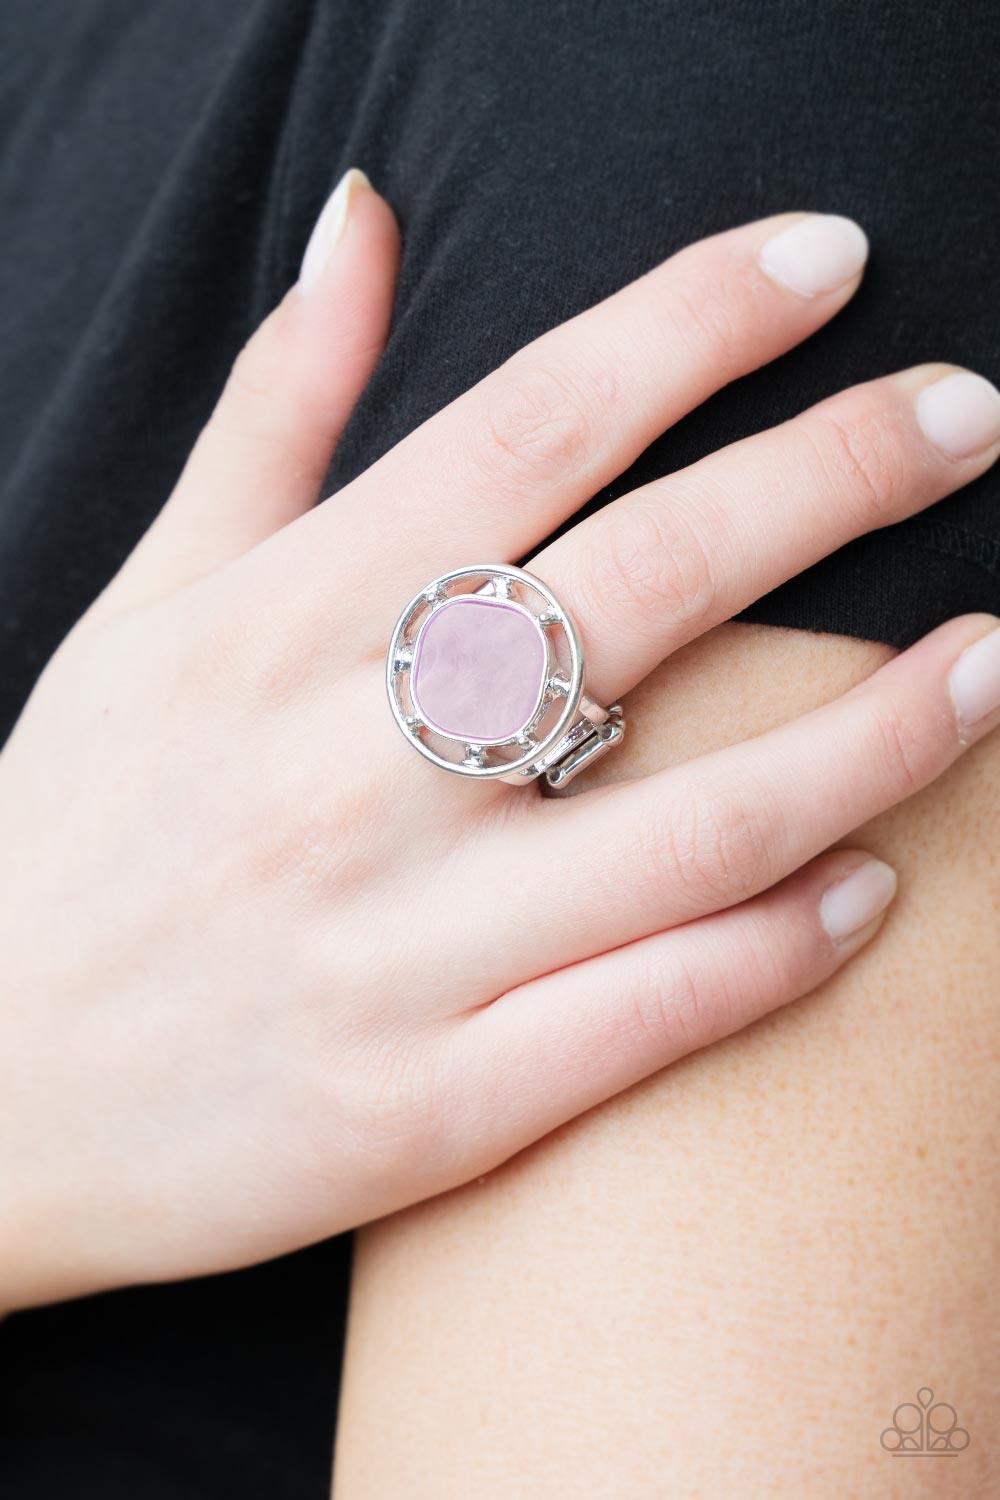 Encompassing Pearlescence Purple Ring - Jewelry by Bretta